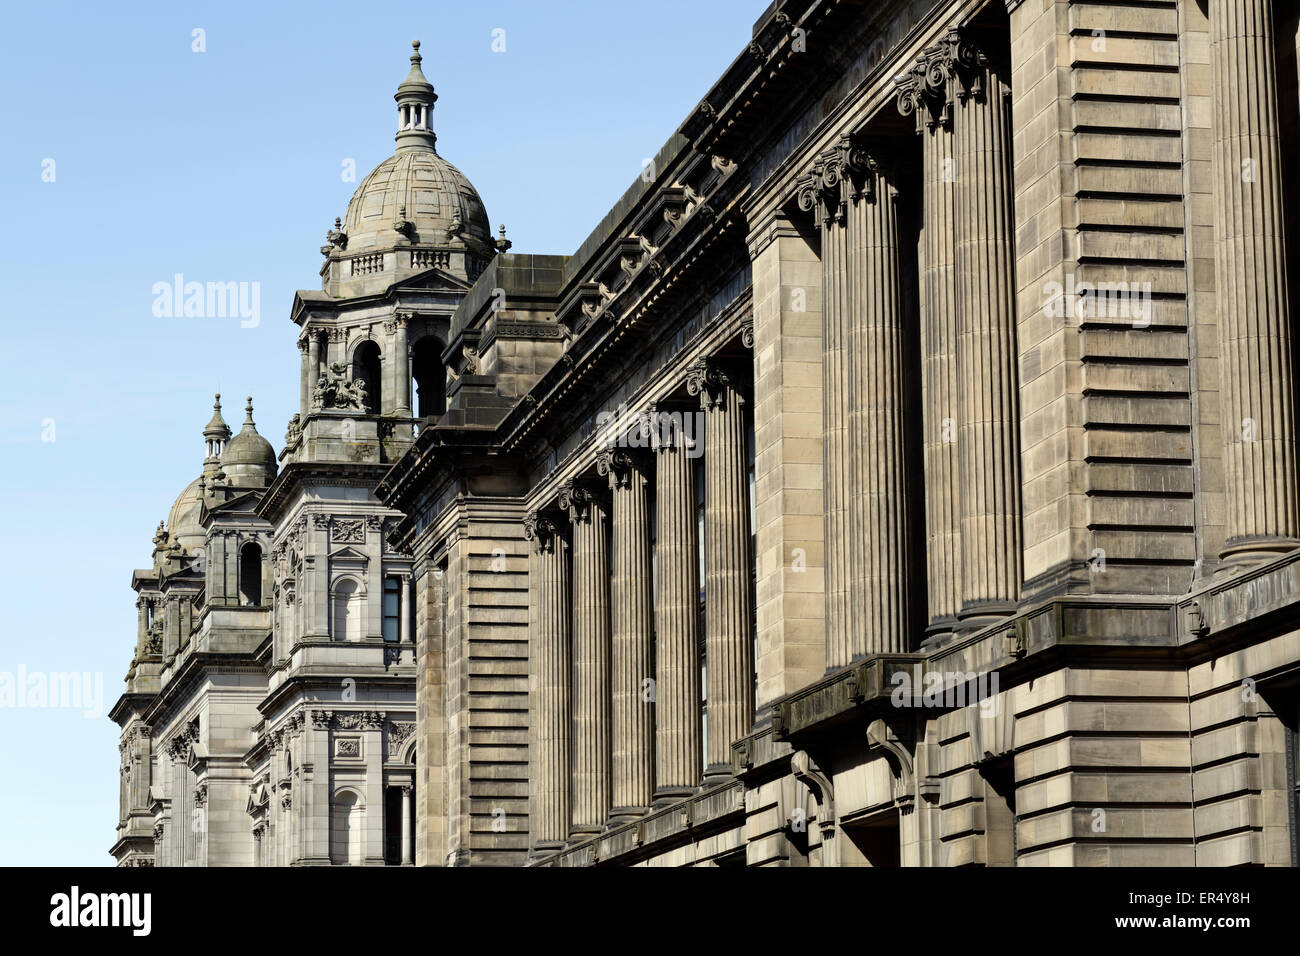 Glasgow City Chambers, Ecosse, Royaume-Uni Banque D'Images